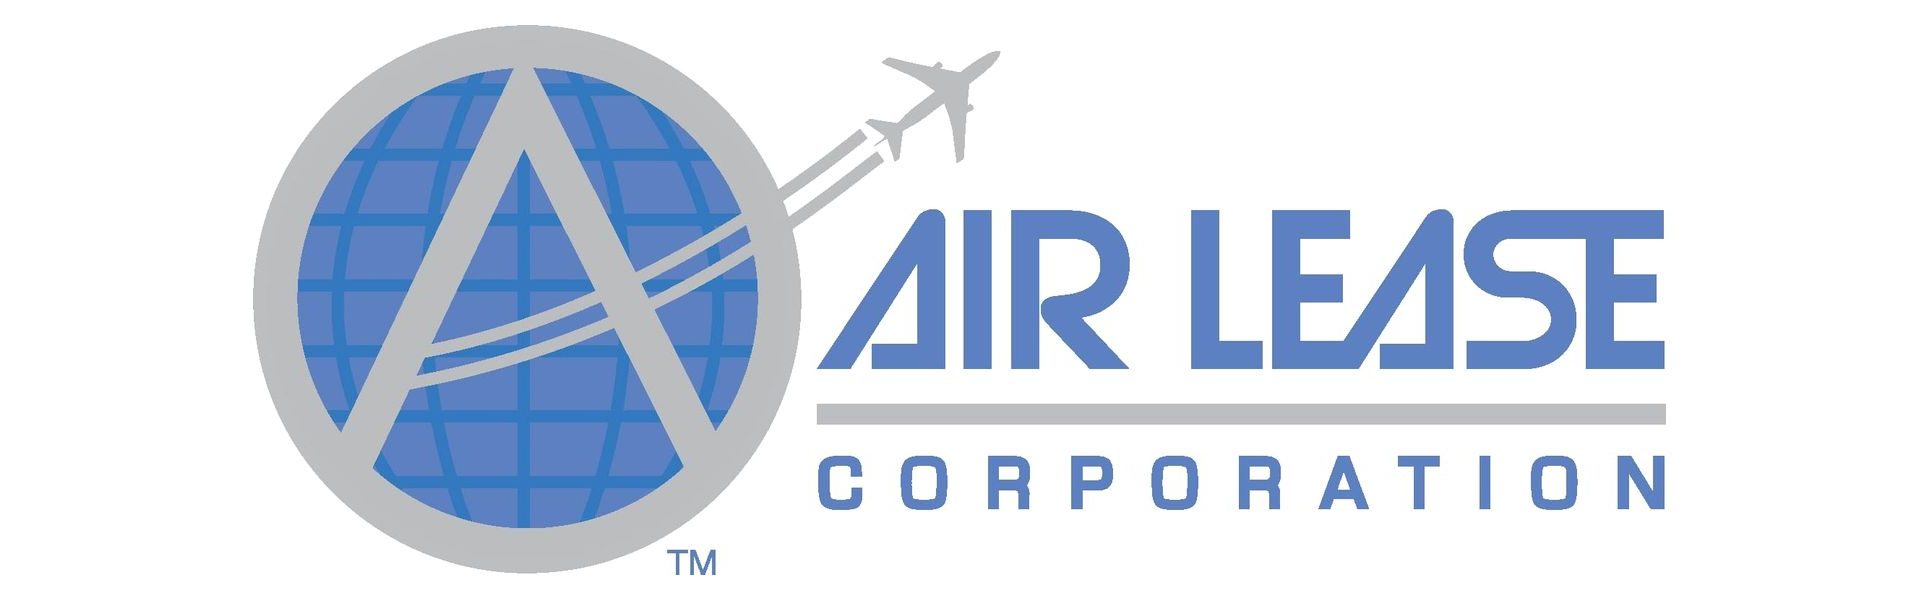 Airbus A320neo deficit urged Air Lease to place order for 50 Boeing 737MAX. Congo Airways failed to extend lease agreement for 2 Embraer airplanes